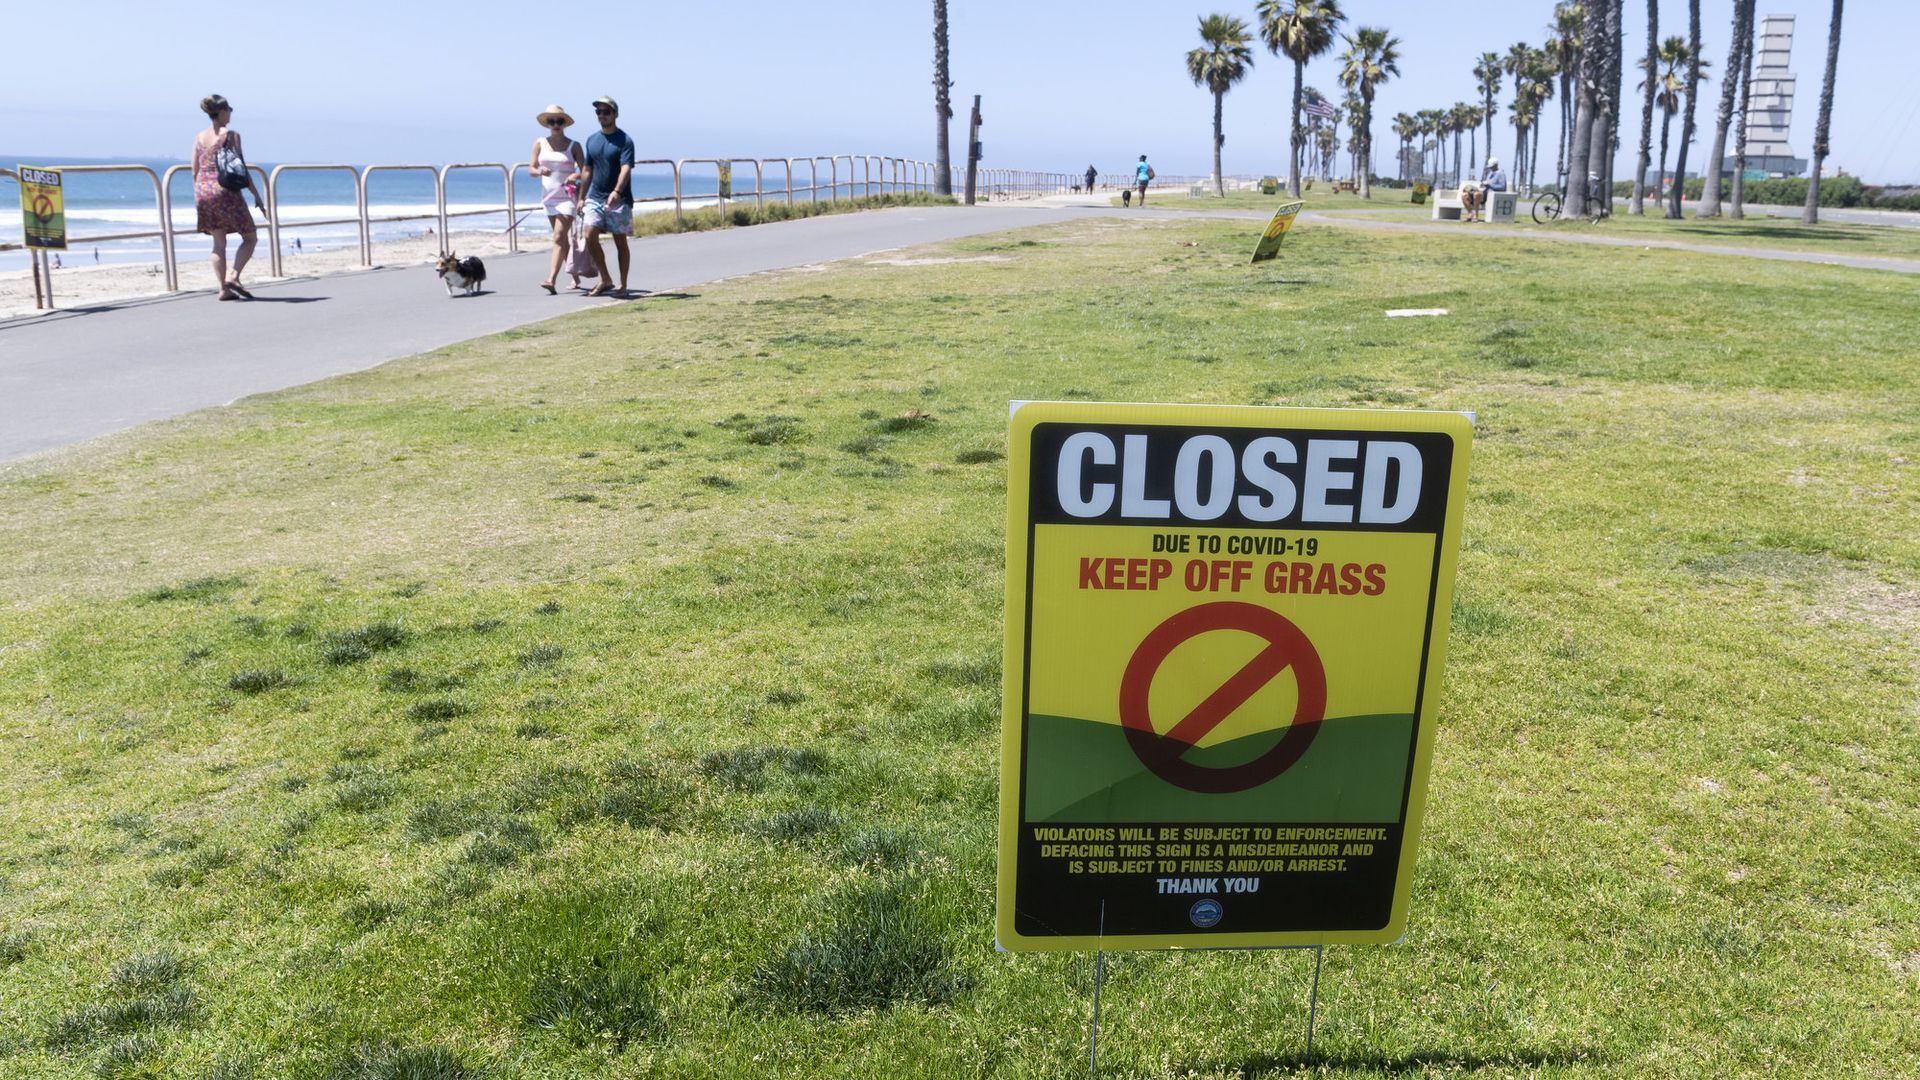 The beach and walkways are open but the grass is closed in Huntington, Calif.